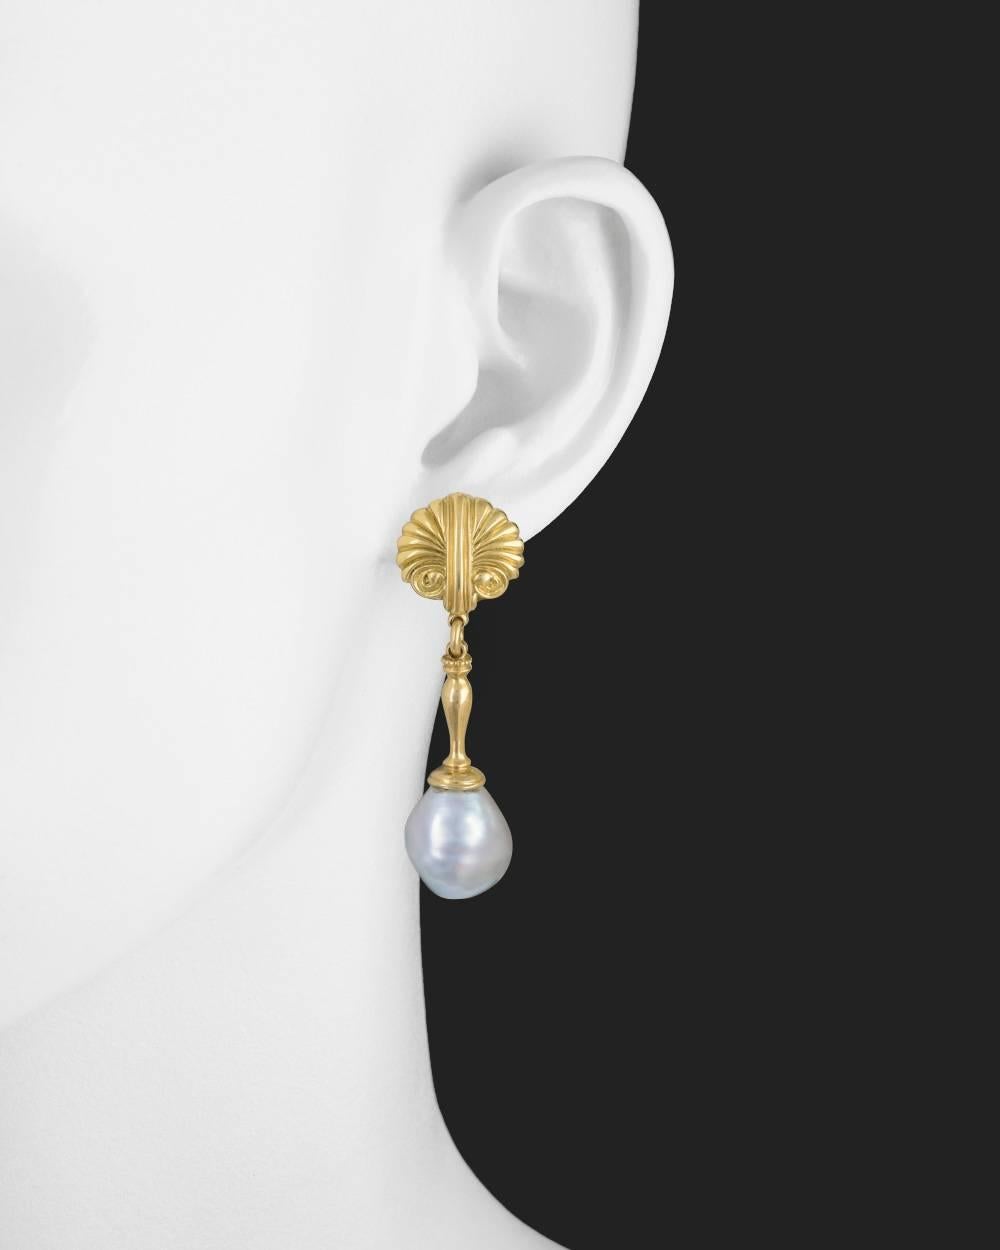 Pendant earrings, showcasing gray-toned baroque pearl drops measuring approximately 13mm in diameter, suspended from scallop shell motif tops with tapered column-style links in 18k yellow gold. Clip backs. 1.9